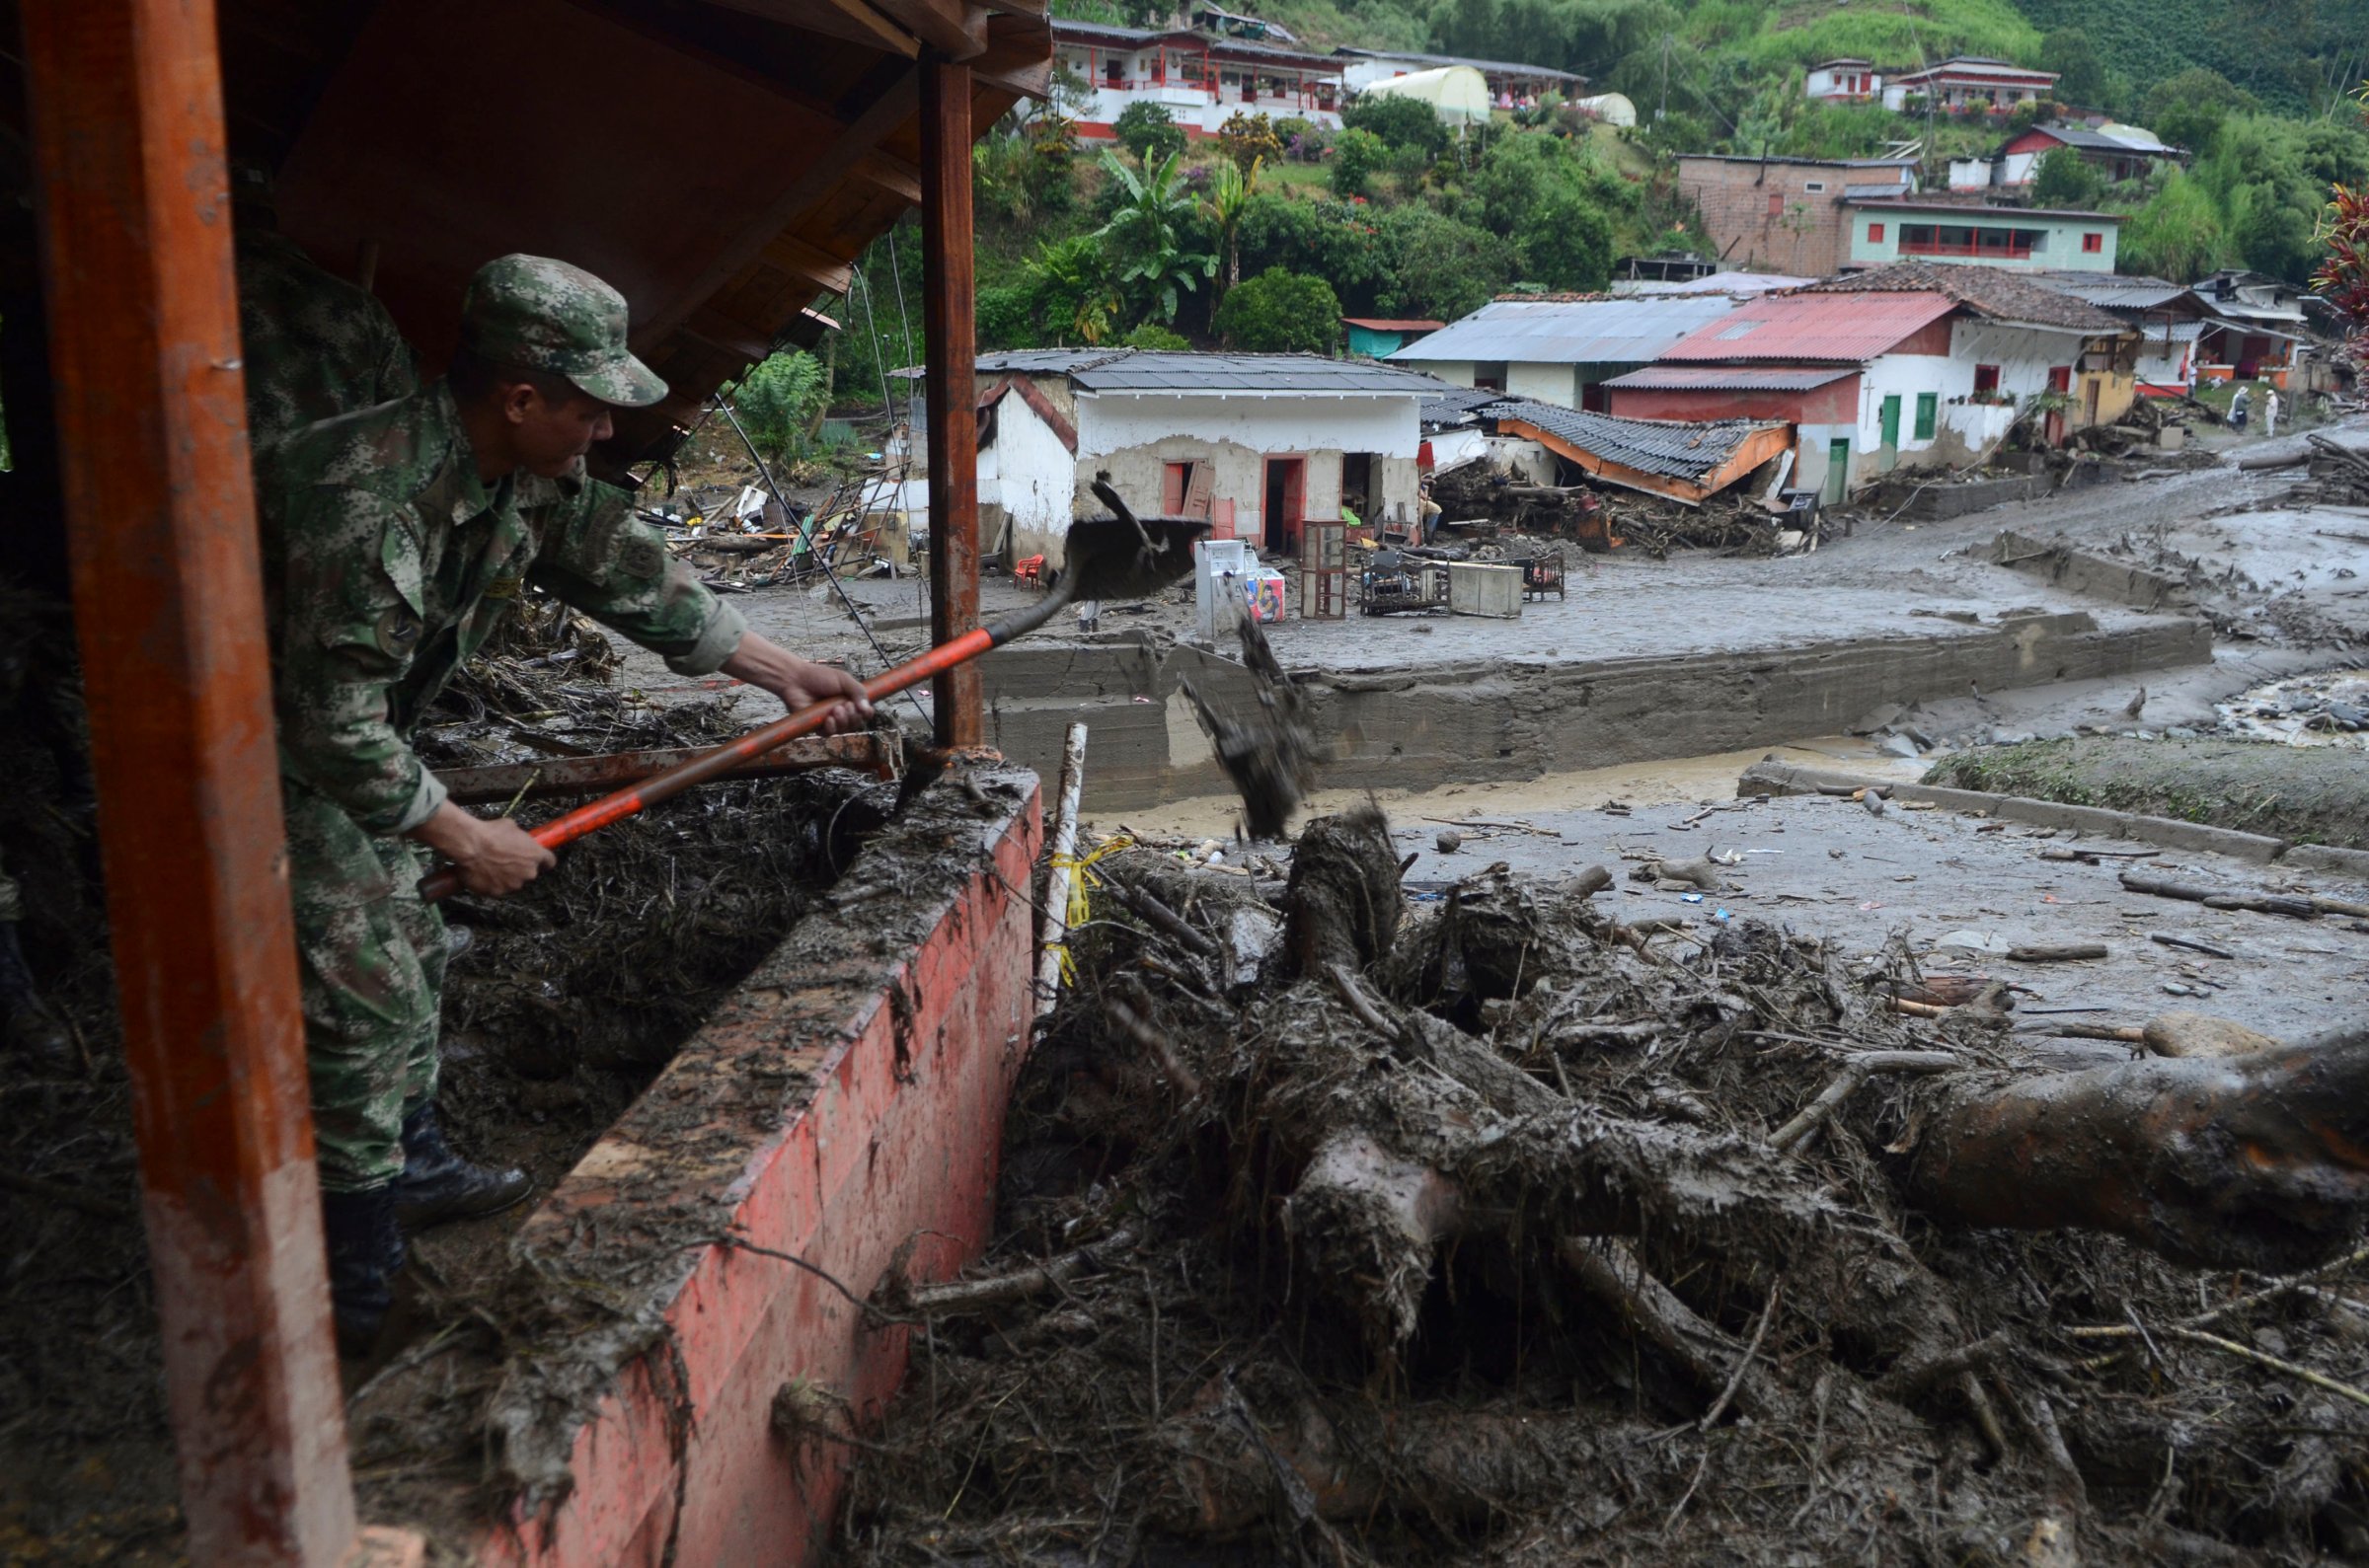 A soldier shovels mud from a house damaged by a mudslide in Salgar, in Colombia's northwestern state of Antioquia, May 19, 2015.